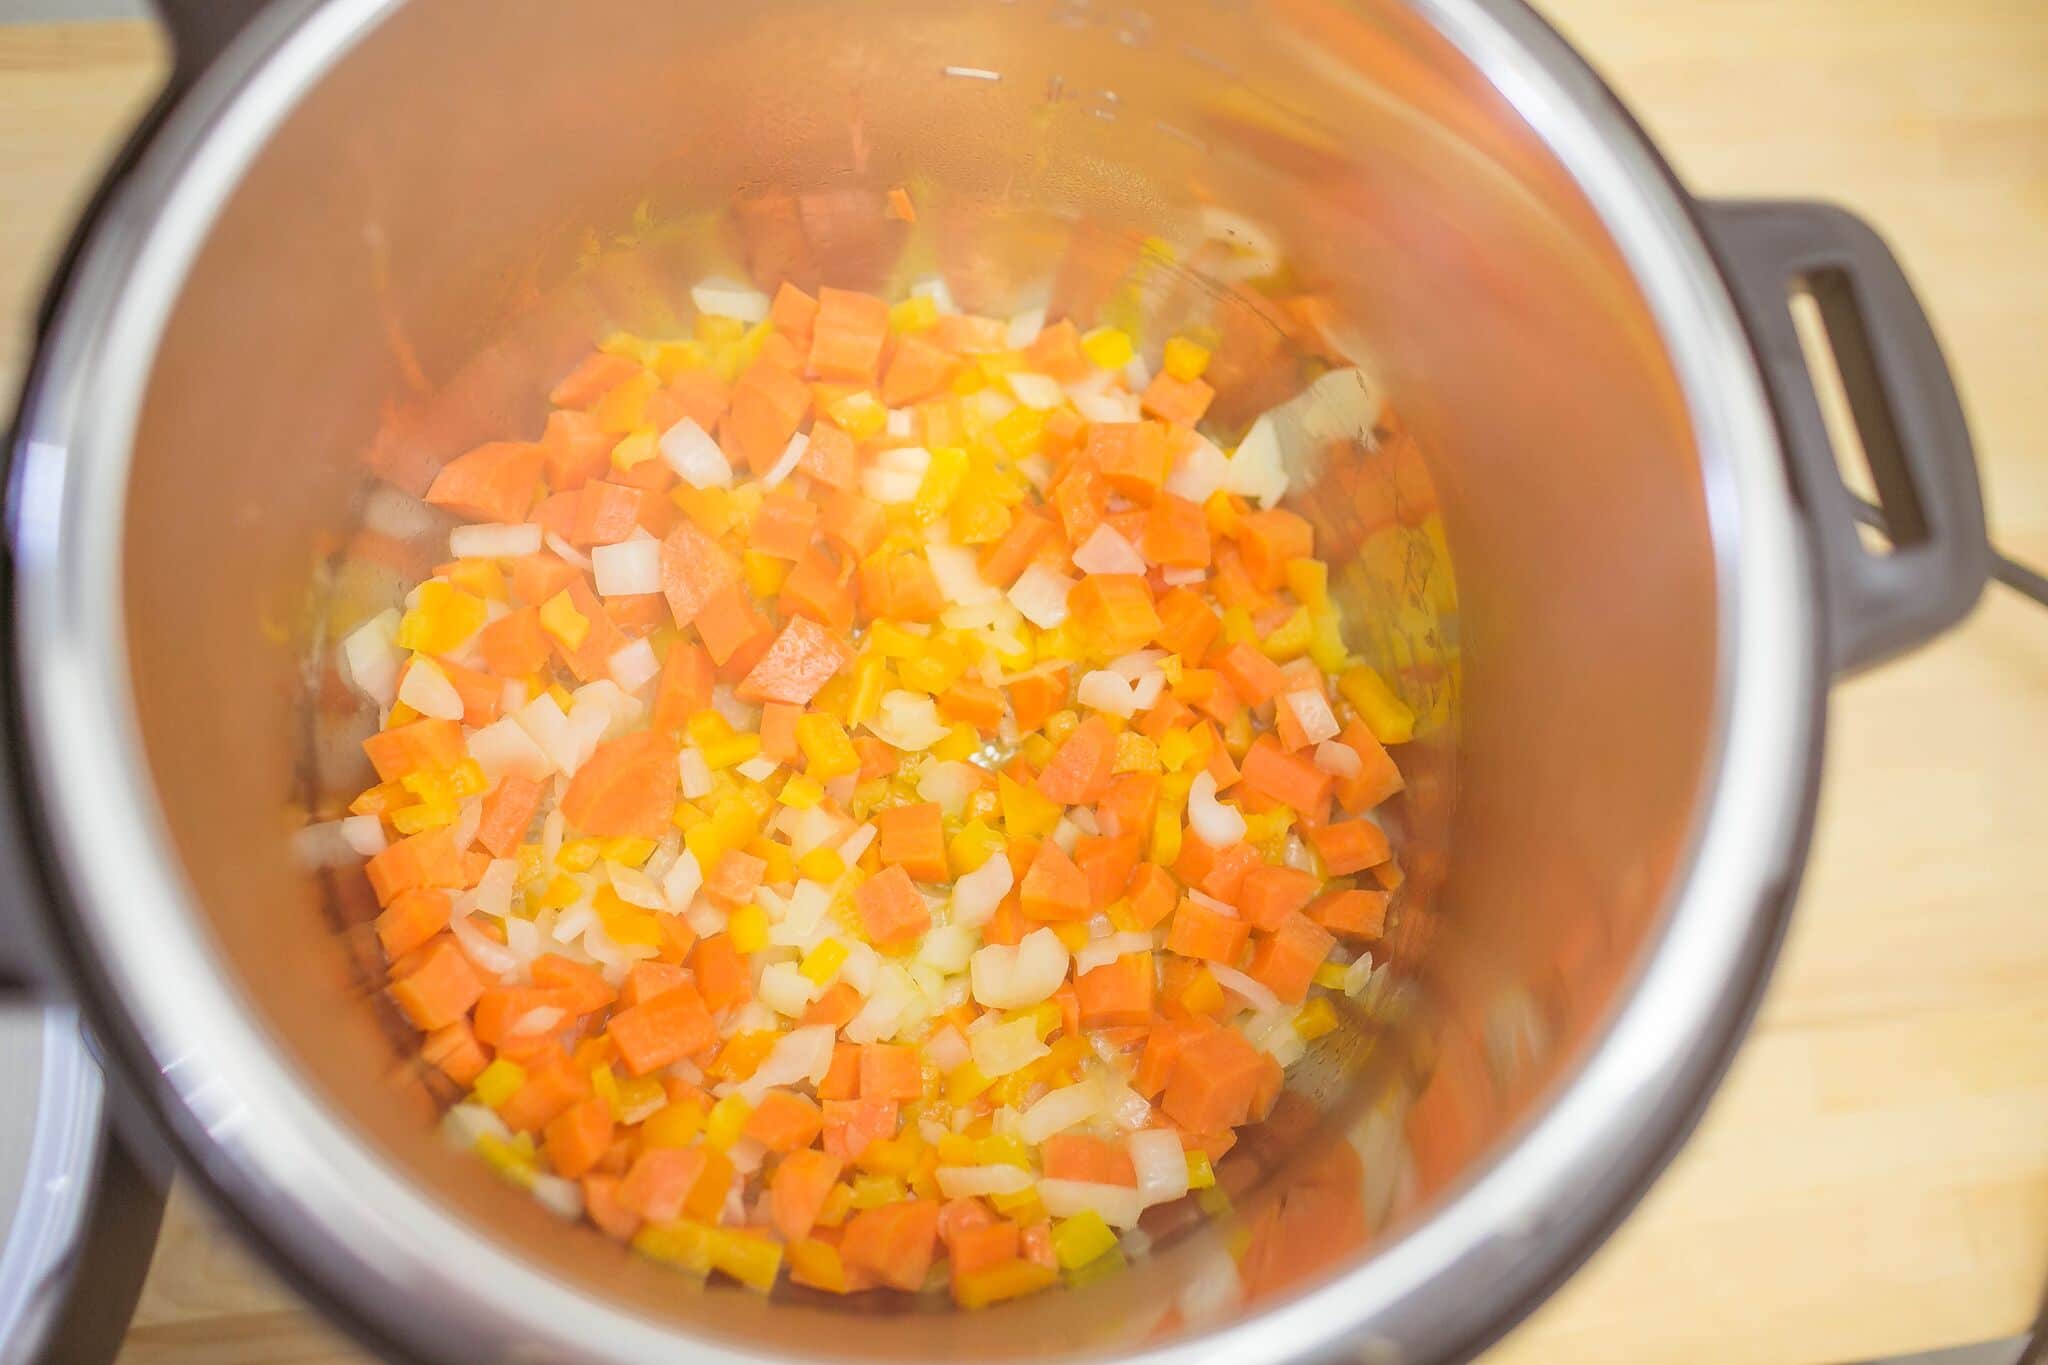 Saute carrots, onions, and peppers for 5 minutes